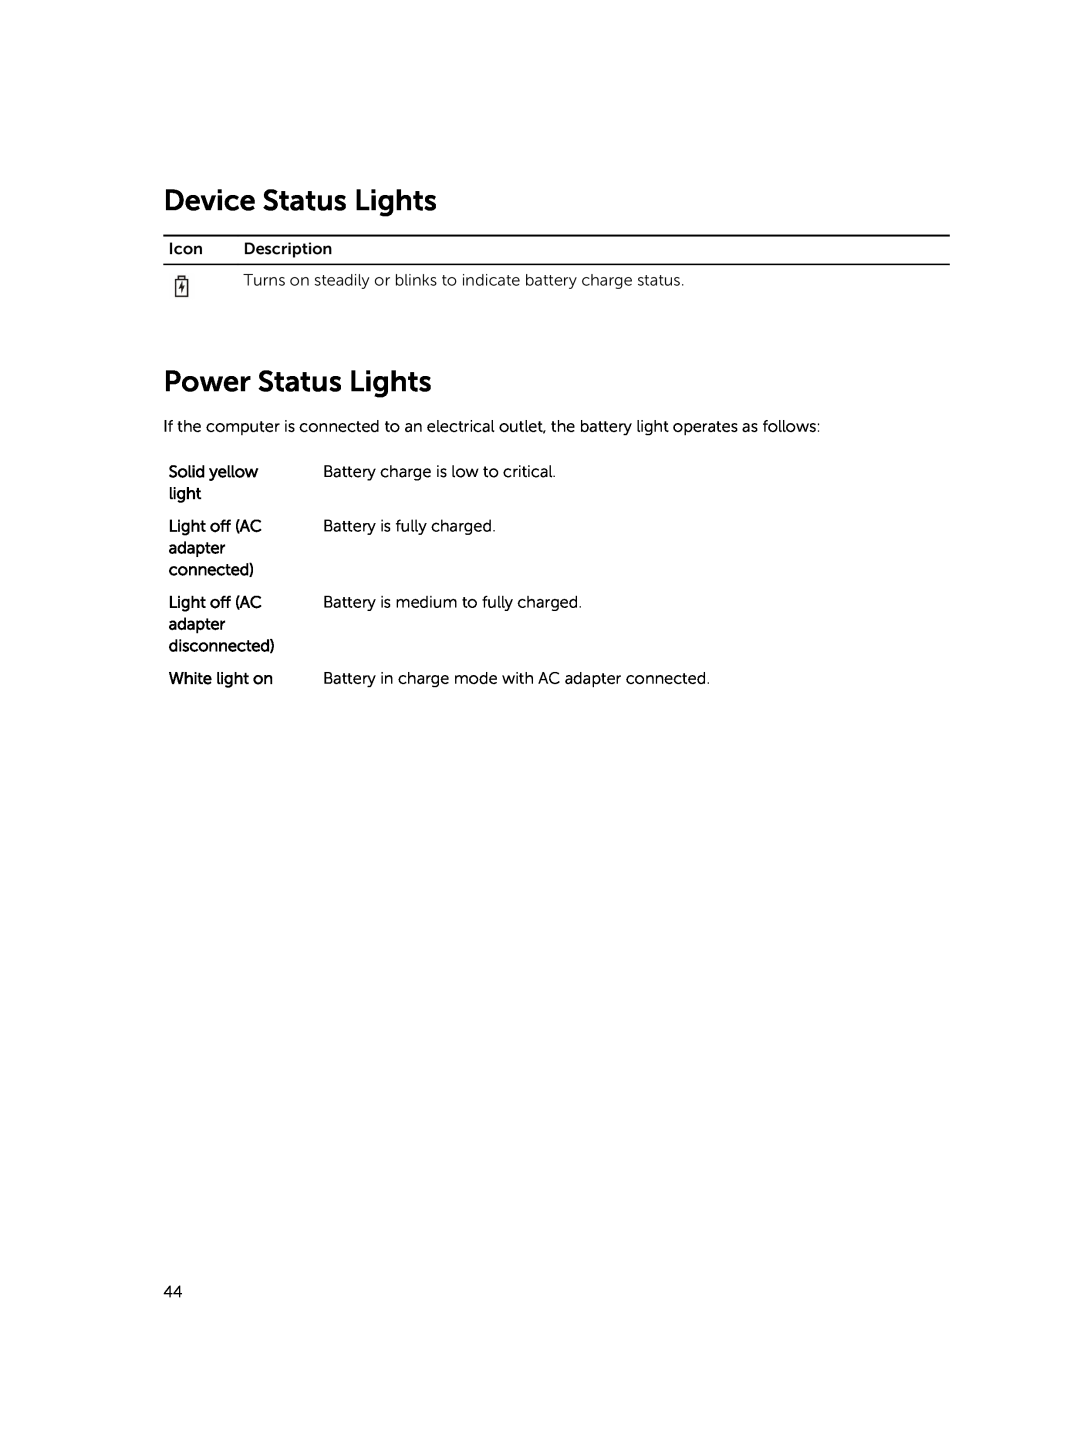 Dell P45F001 Device Status Lights, Power Status Lights, Icon Description, Battery in charge mode with AC adapter connected 